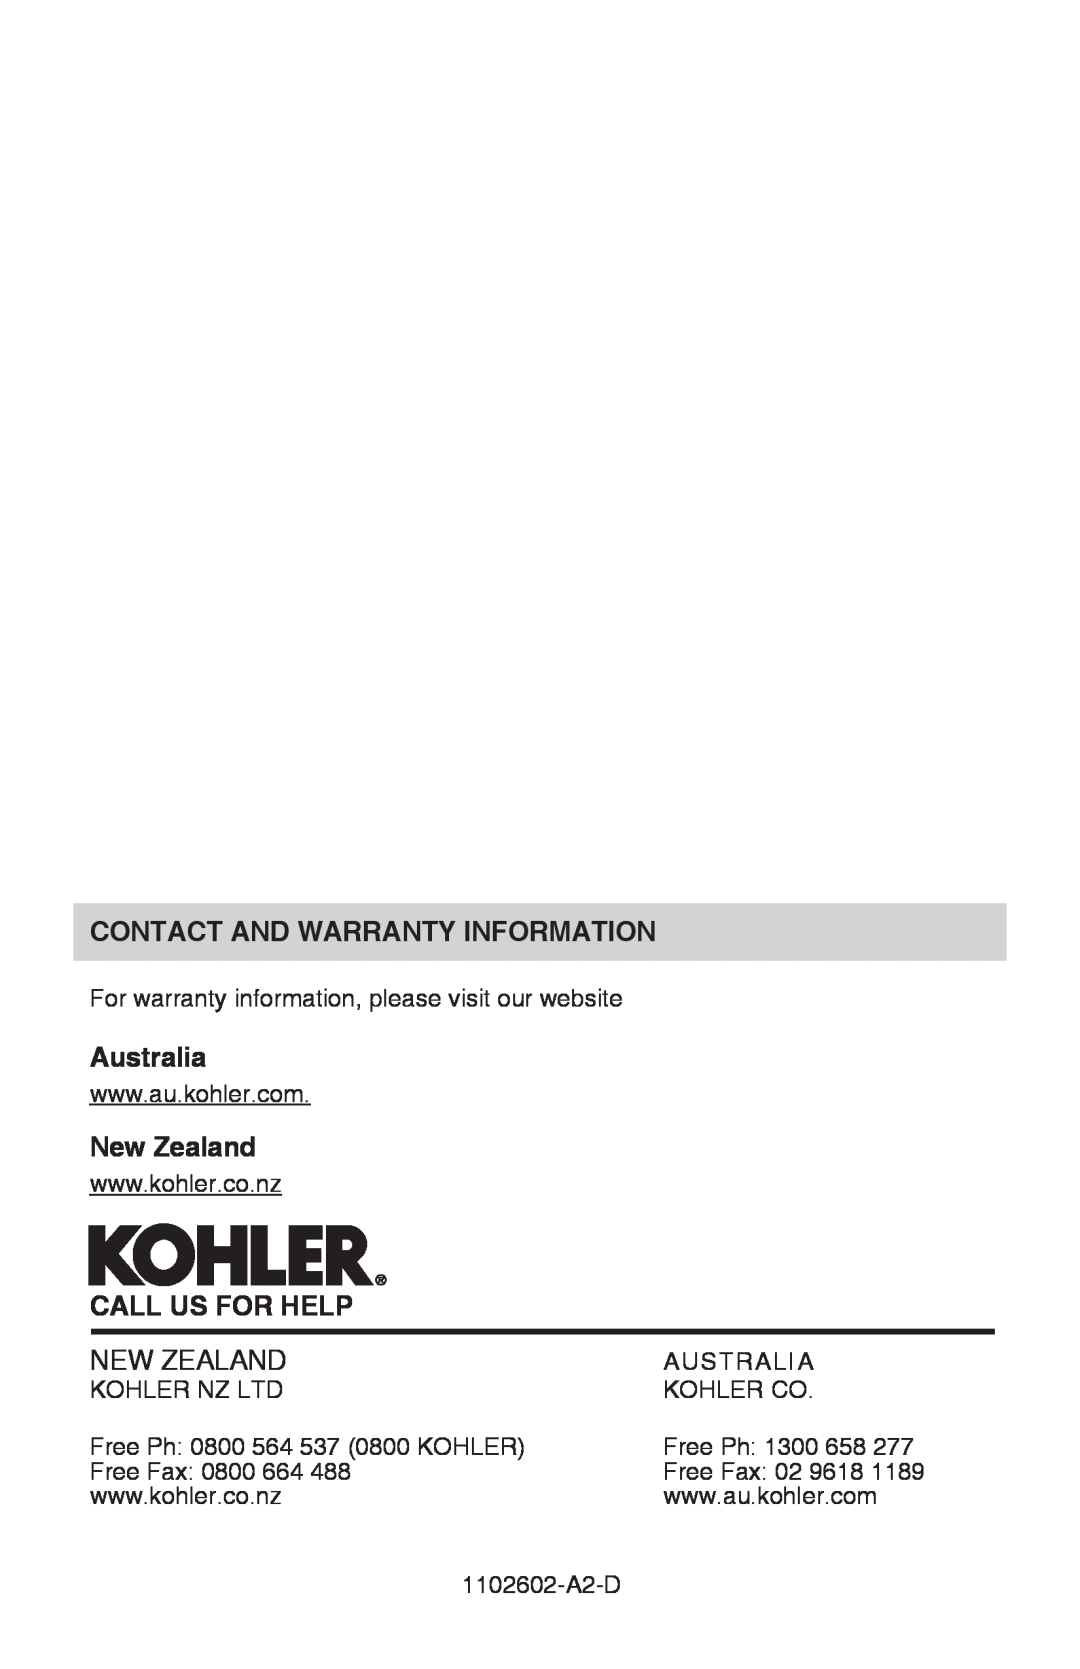 Kohler 1102602-A2-D manual Contact And Warranty Information, Australia, New Zealand, Call Us For Help 